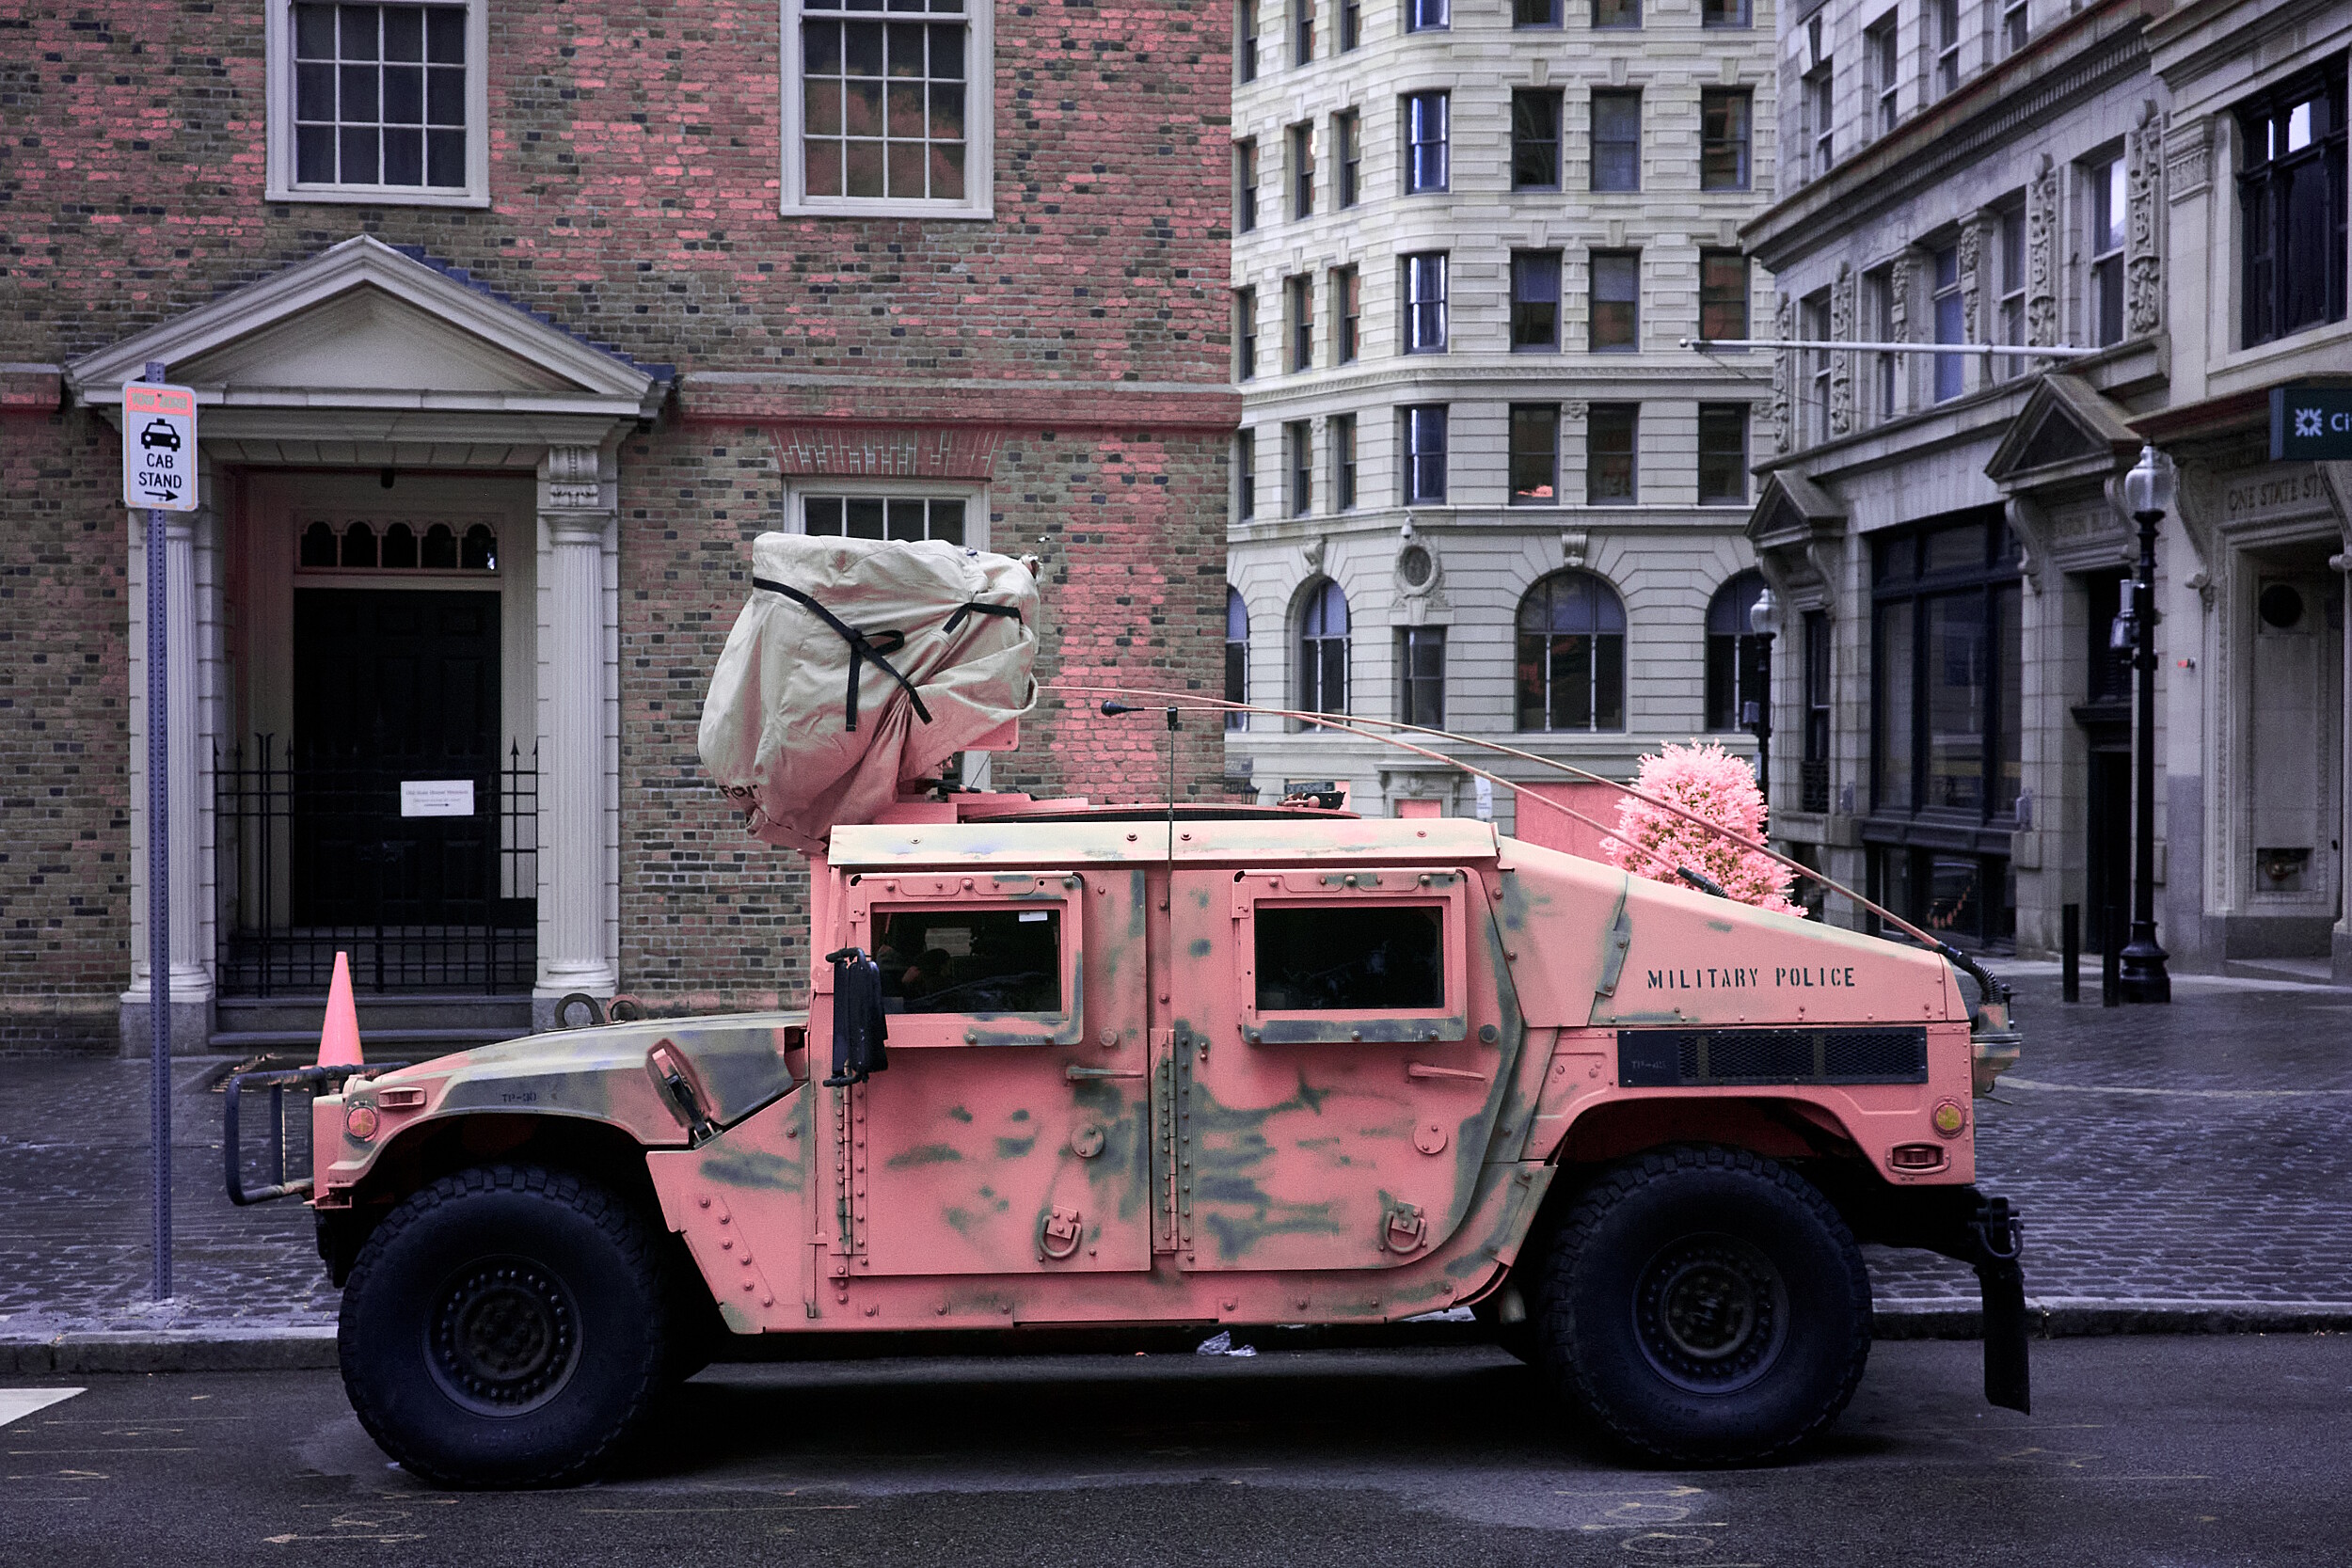 An infrared photo from downtown Boston showing a pink Humvee parked in a cab stand spot.